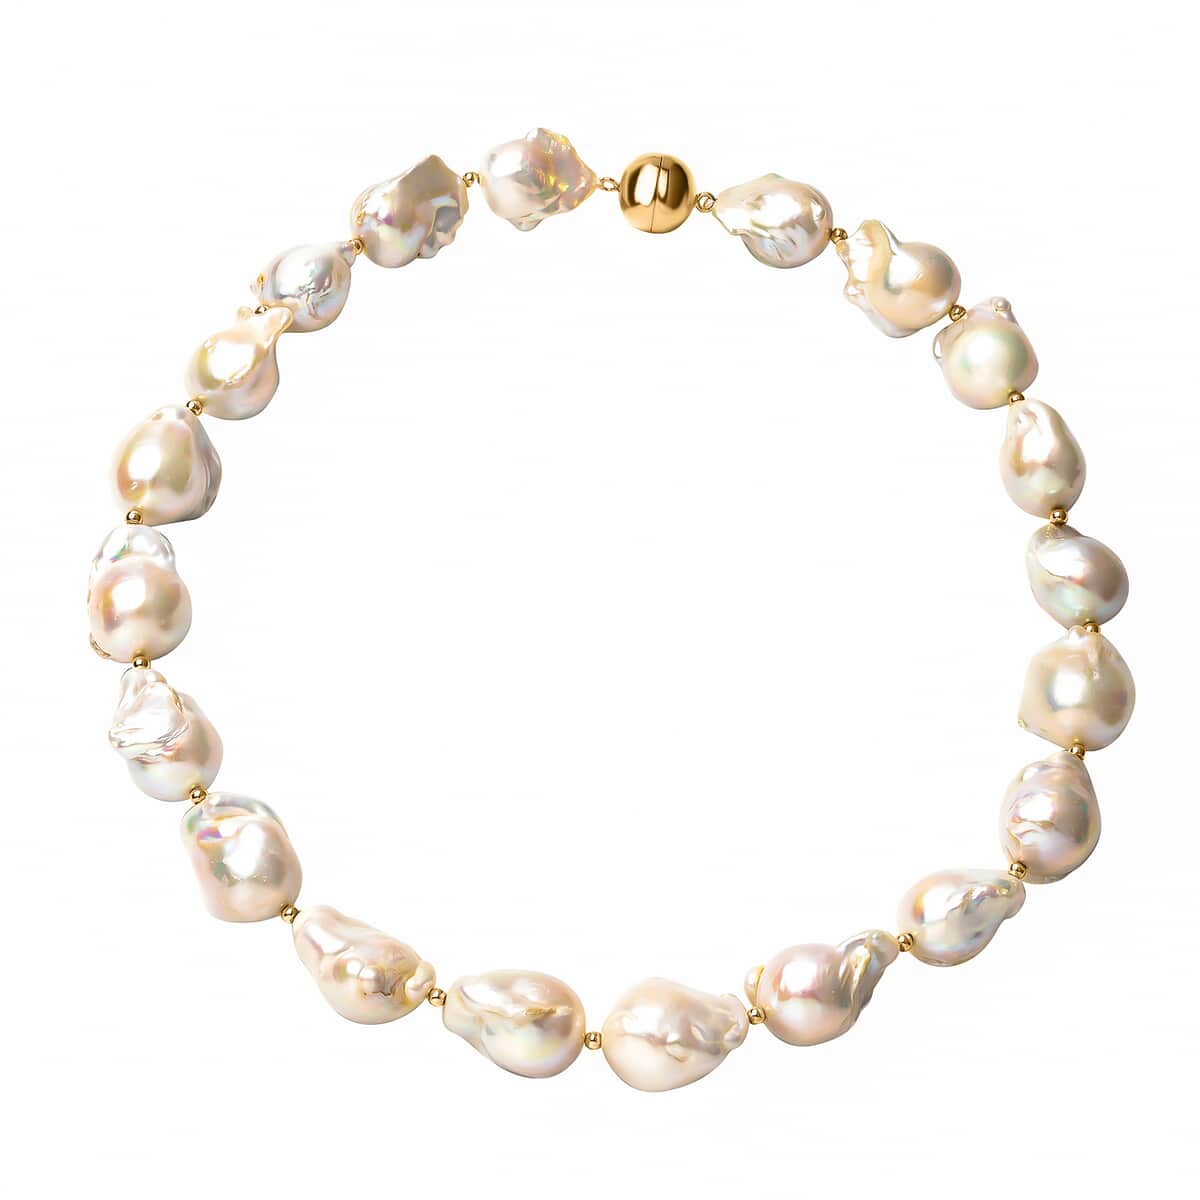 Organic Shape Baroque Pearl Necklace 20 Inches in 14K YG Over Sterling Silver 7 Grams image number 0